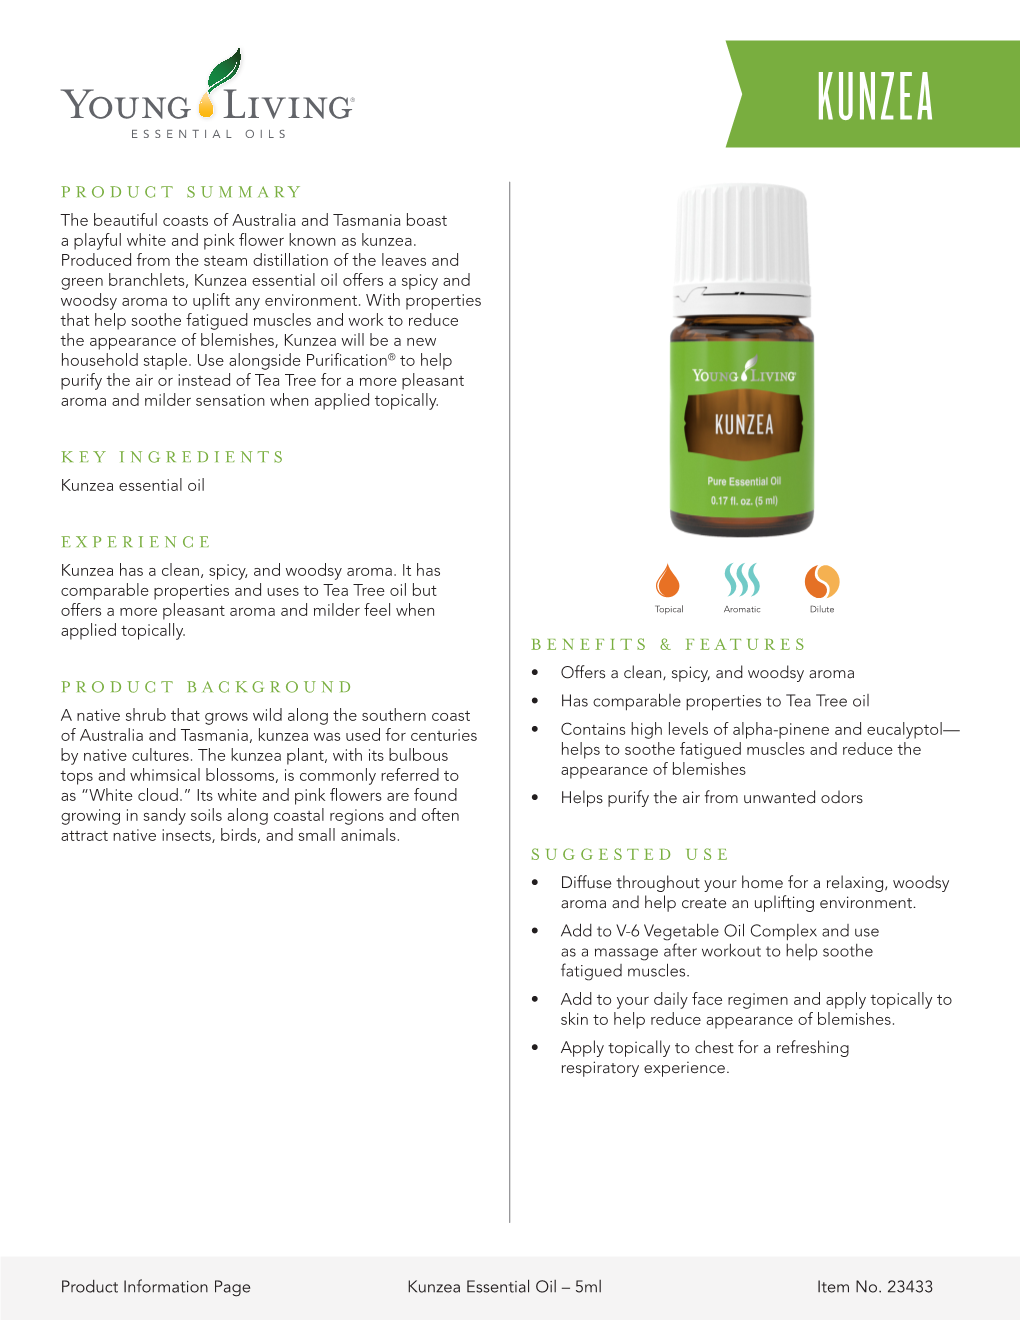 Kunzea Essential Oil Offers a Spicy and Woodsy Aroma to Uplift Any Environment